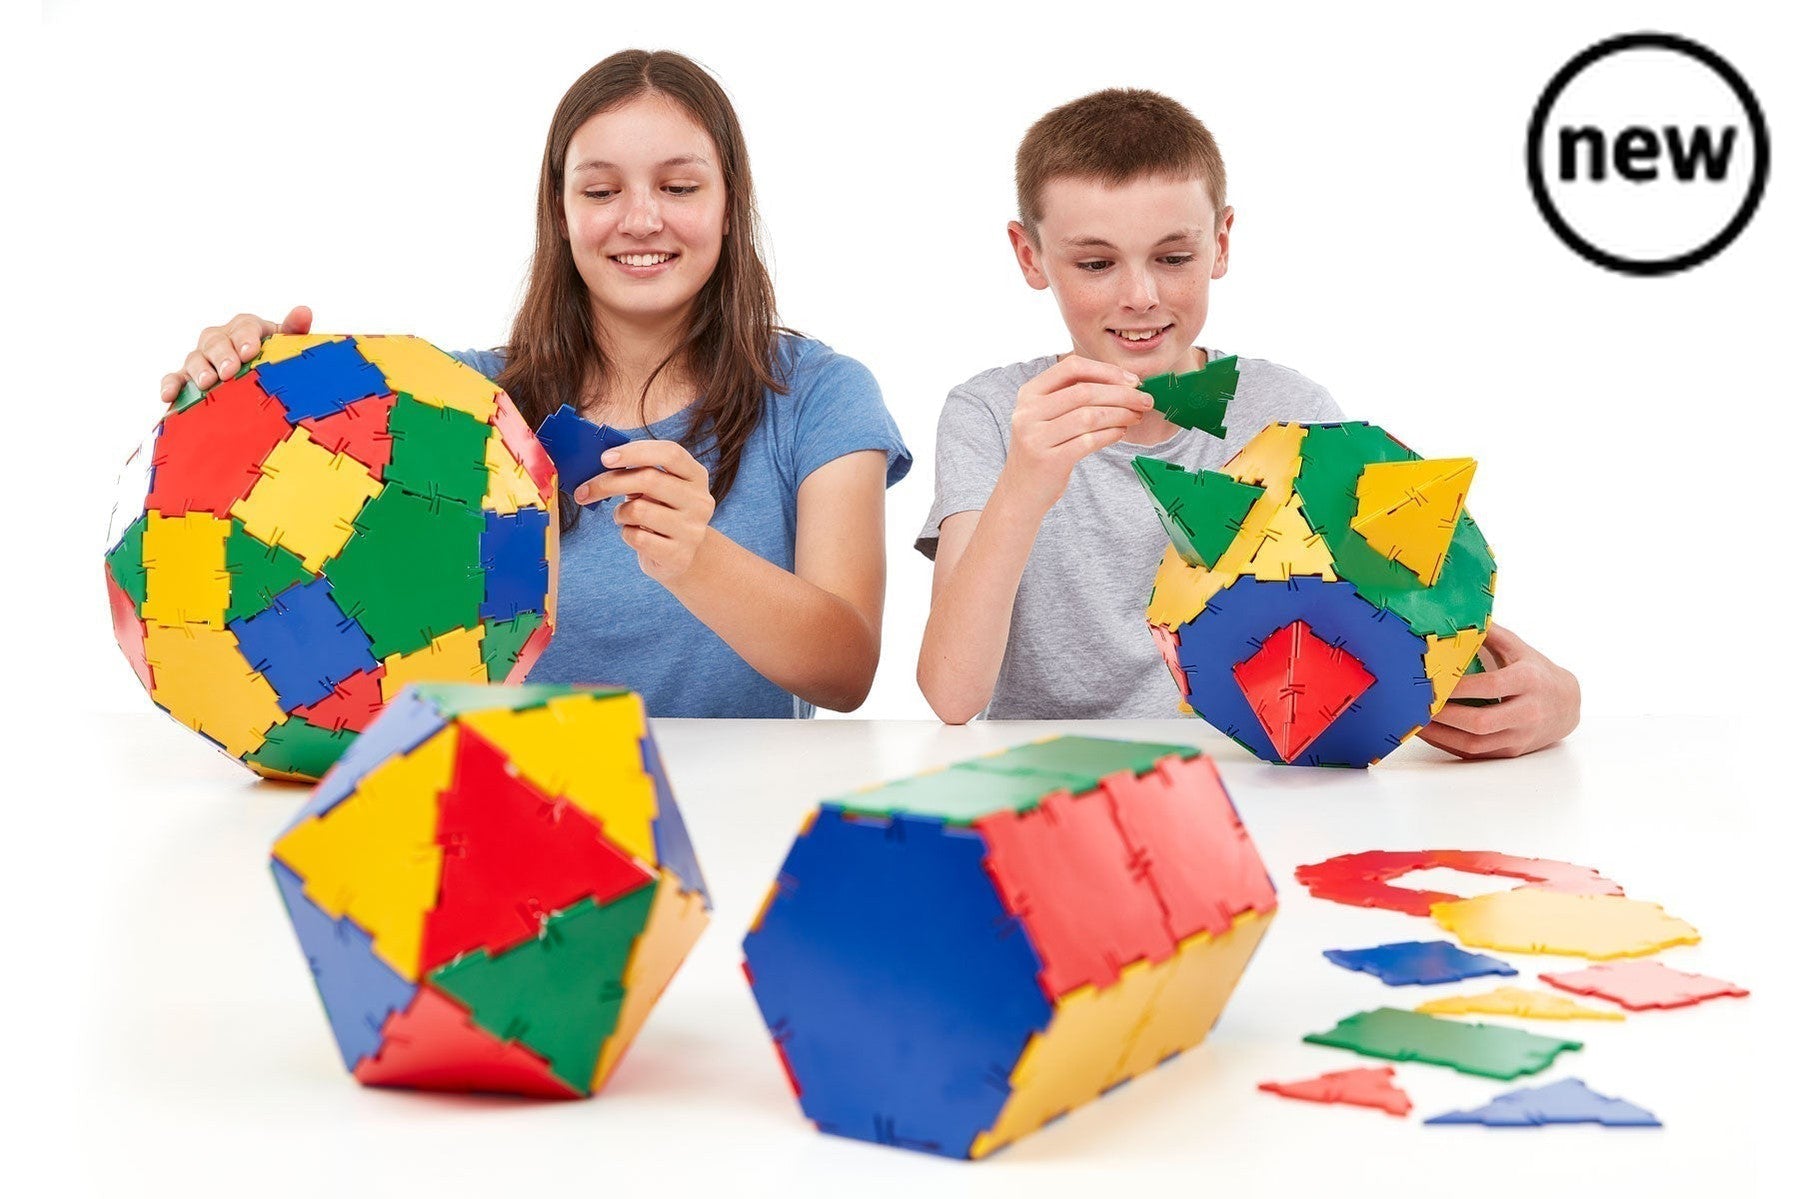 Polydron Primary Maths Set, The Polydron Primary Maths Set is the ultimate resource for primary schools, providing a comprehensive collection of mathematical shapes for classroom activities and lessons. Specifically designed to be used in conjunction with the 'Primary Mathematics with Polydron' book, this set offers a hands-on approach to learning mathematics.Featuring over 400 pieces of different mathematical shapes, the Polydron Primary Maths Set offers endless possibilities for exploration and discovery.